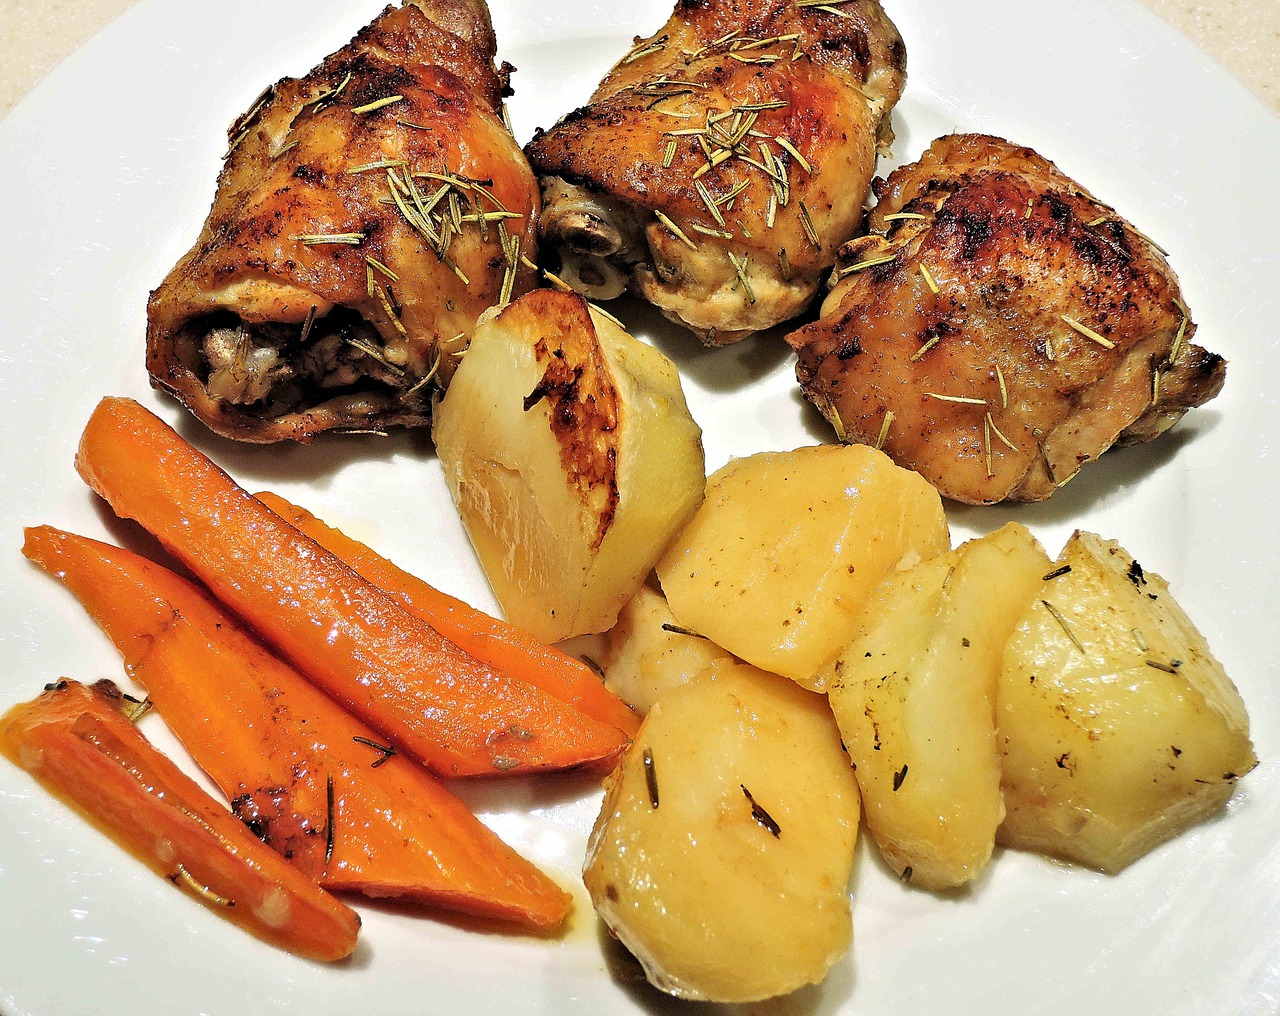 Roasted Garlic Heads and New Potatoes With Rosemary